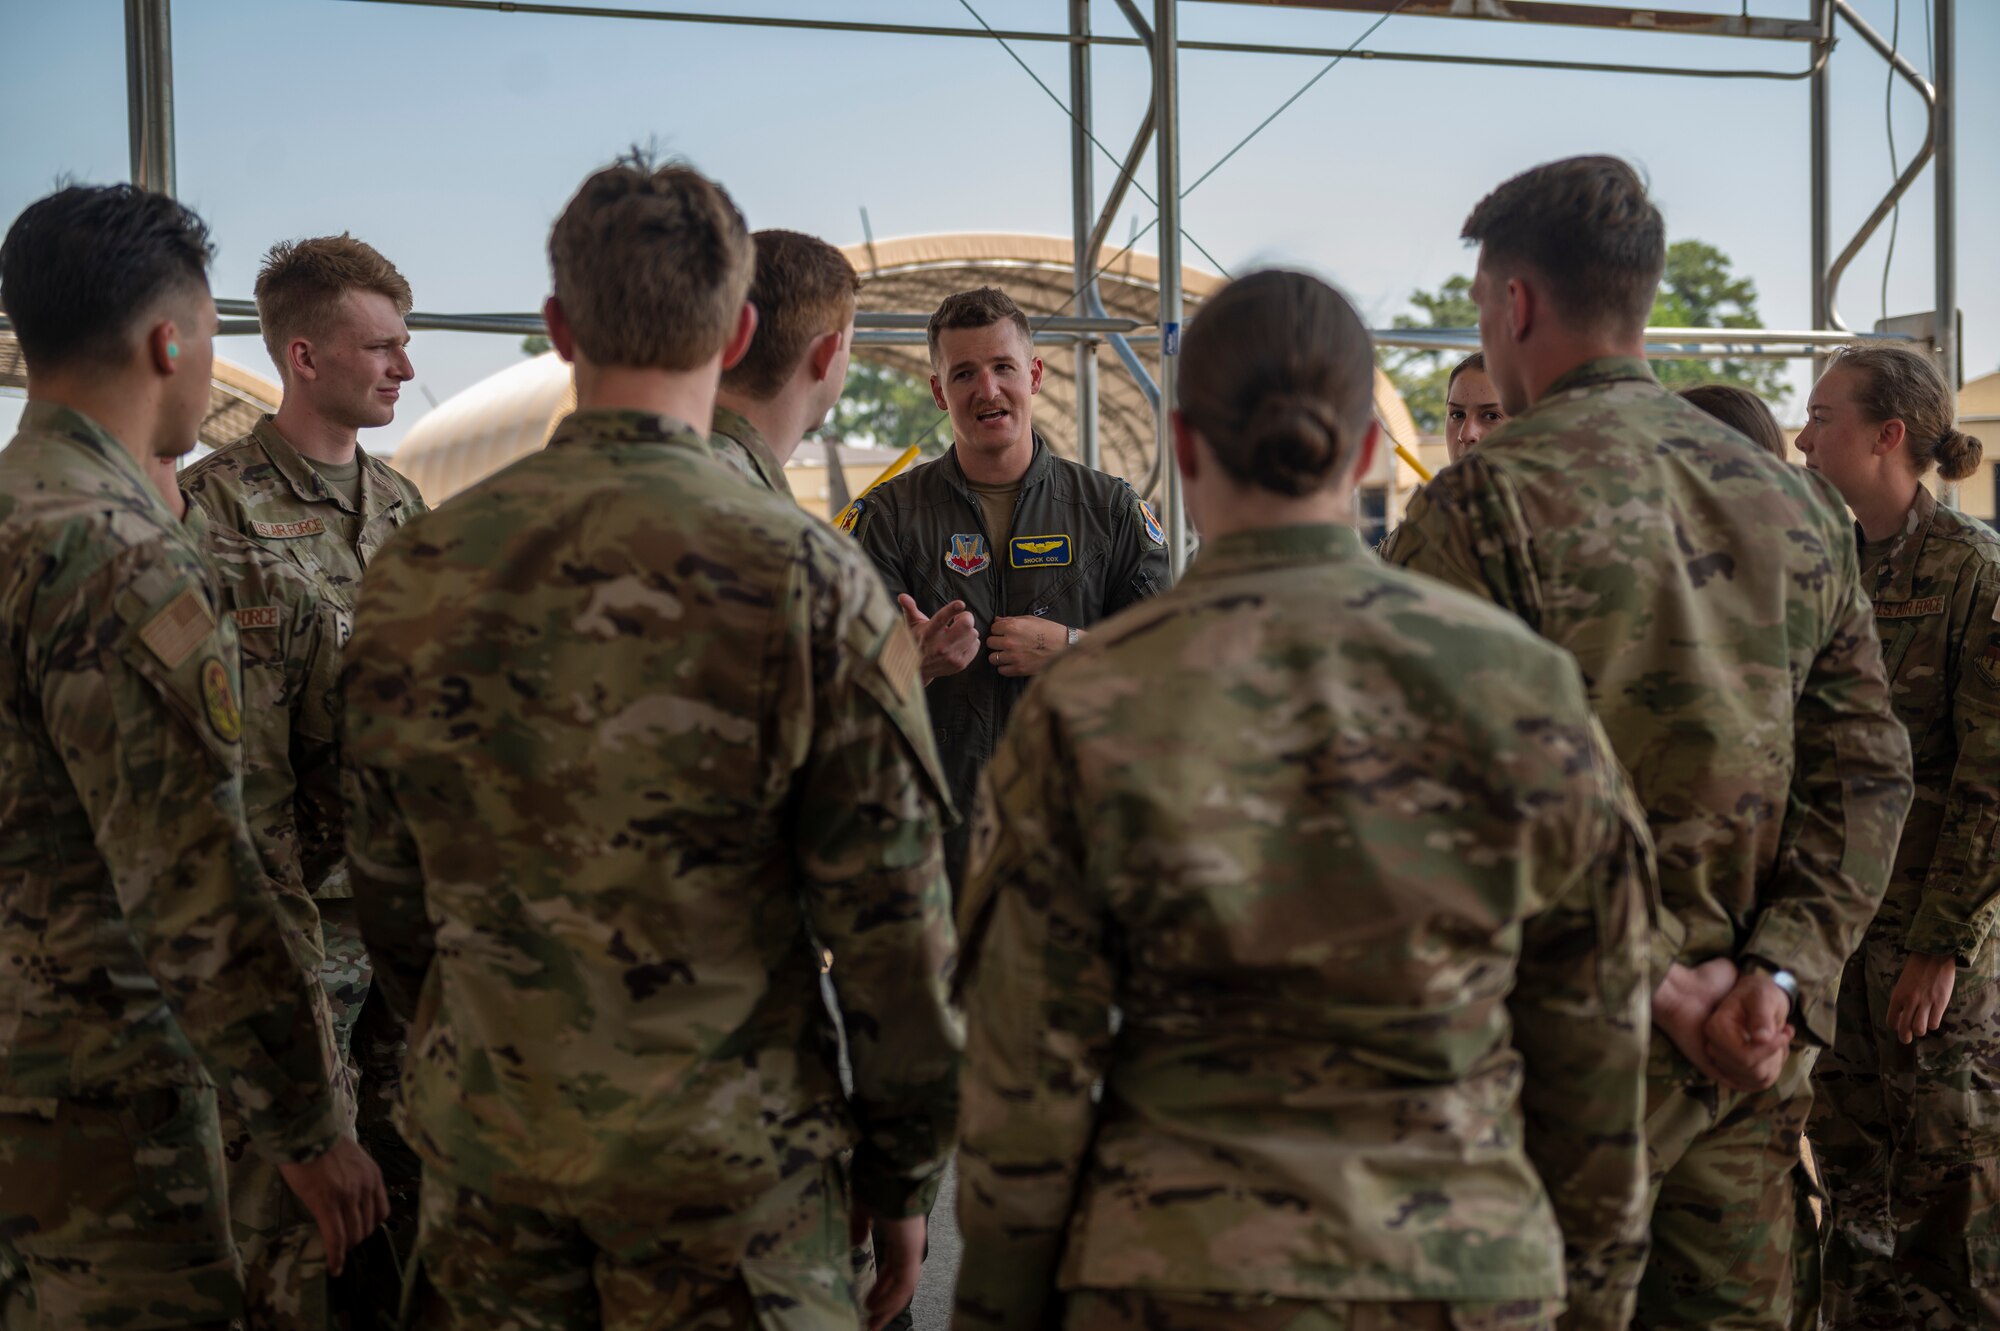 Cox explained the mission and responsibilities of an F-15E Strike Eagle fighter pilot as part of an F-15E tour for the cadets. (U.S. Air Force photo by Senior Airman Kylie Barrow)